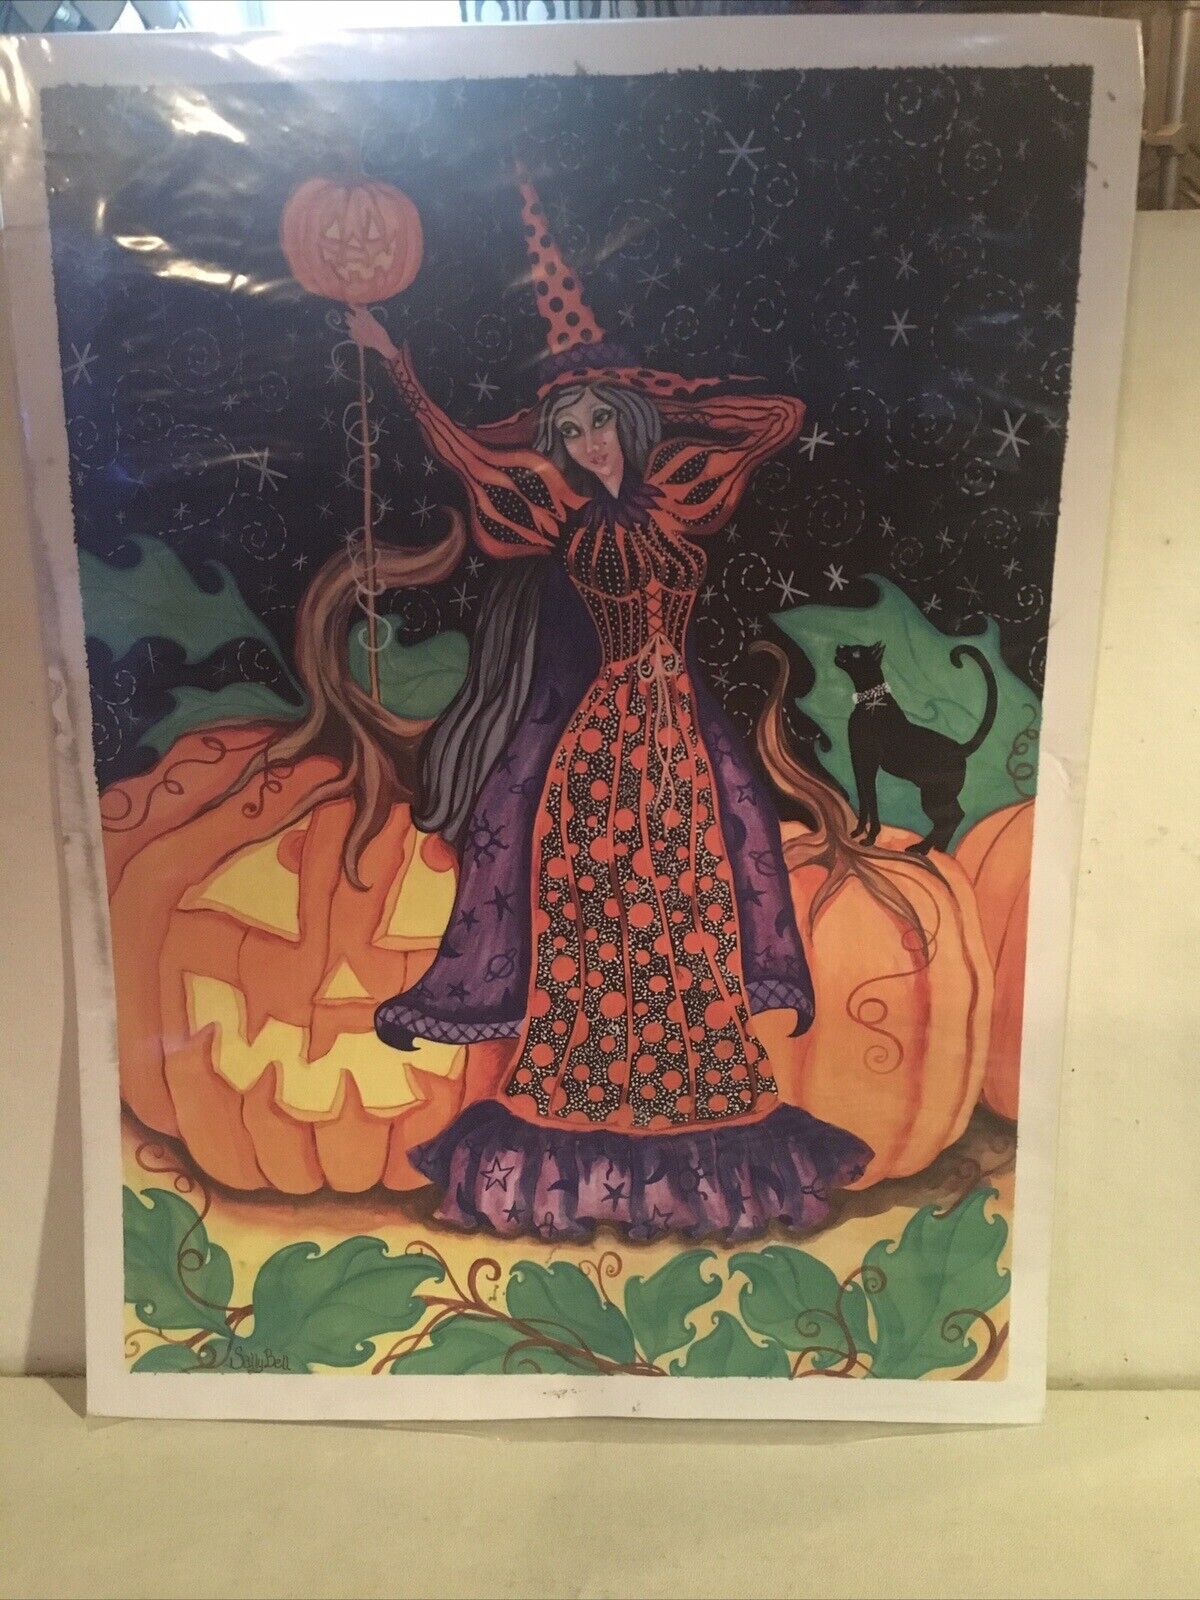 Halloween Art Print Witch In Pumpkin Patch 15” By 11”